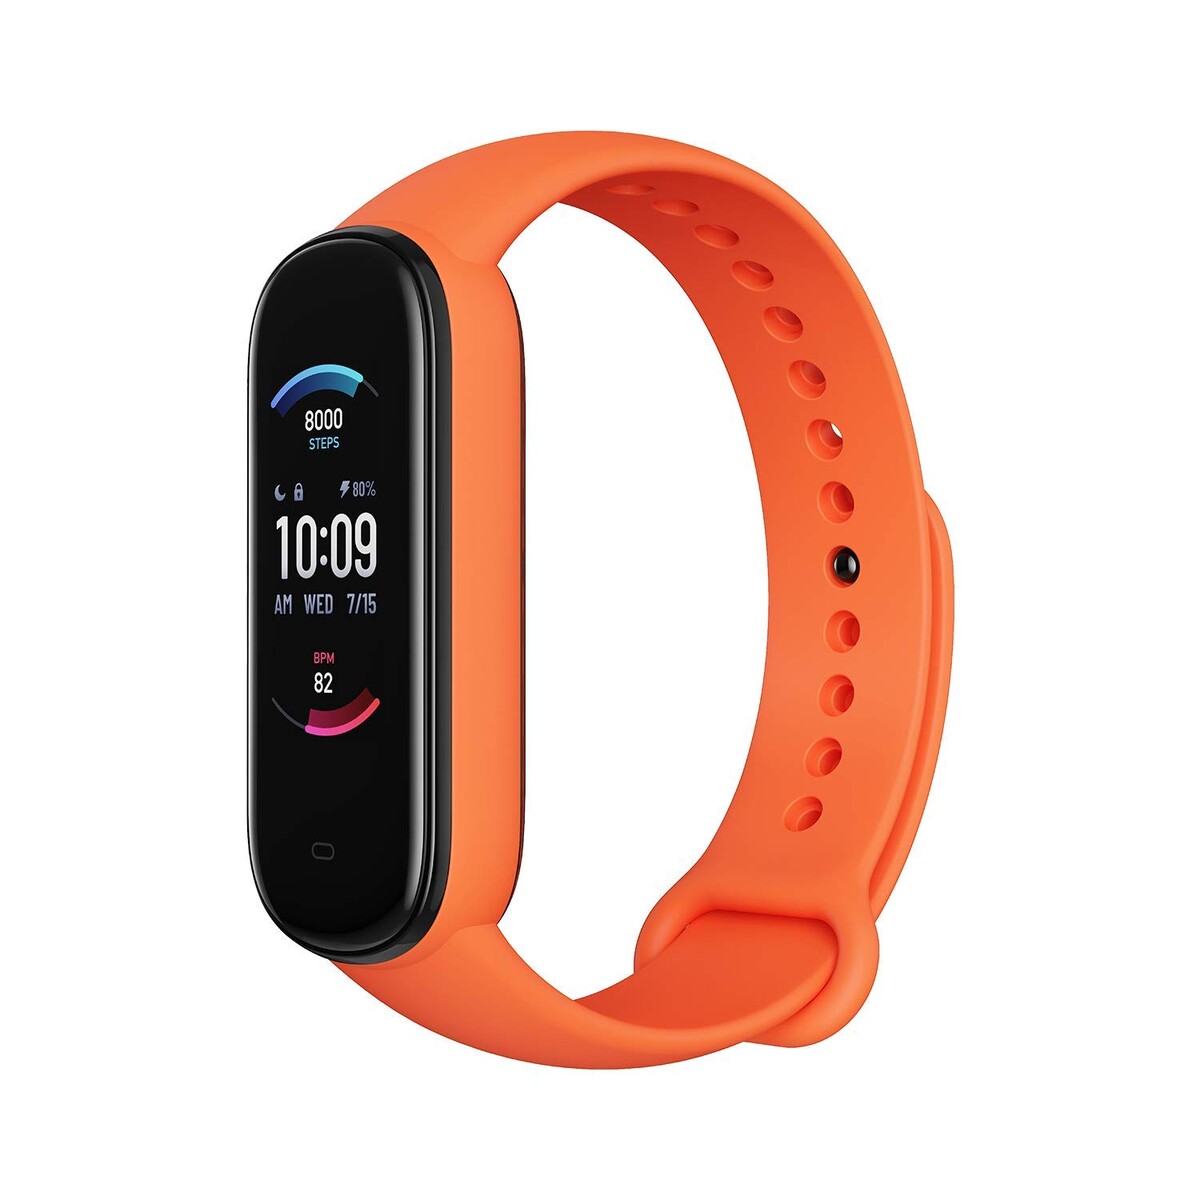 Huami Amazfit Band 6 or Xiaomi Mi Smart Band 5 Pro: Former visits the FCC  suggesting it could be the latter rebranded for the US market -   News